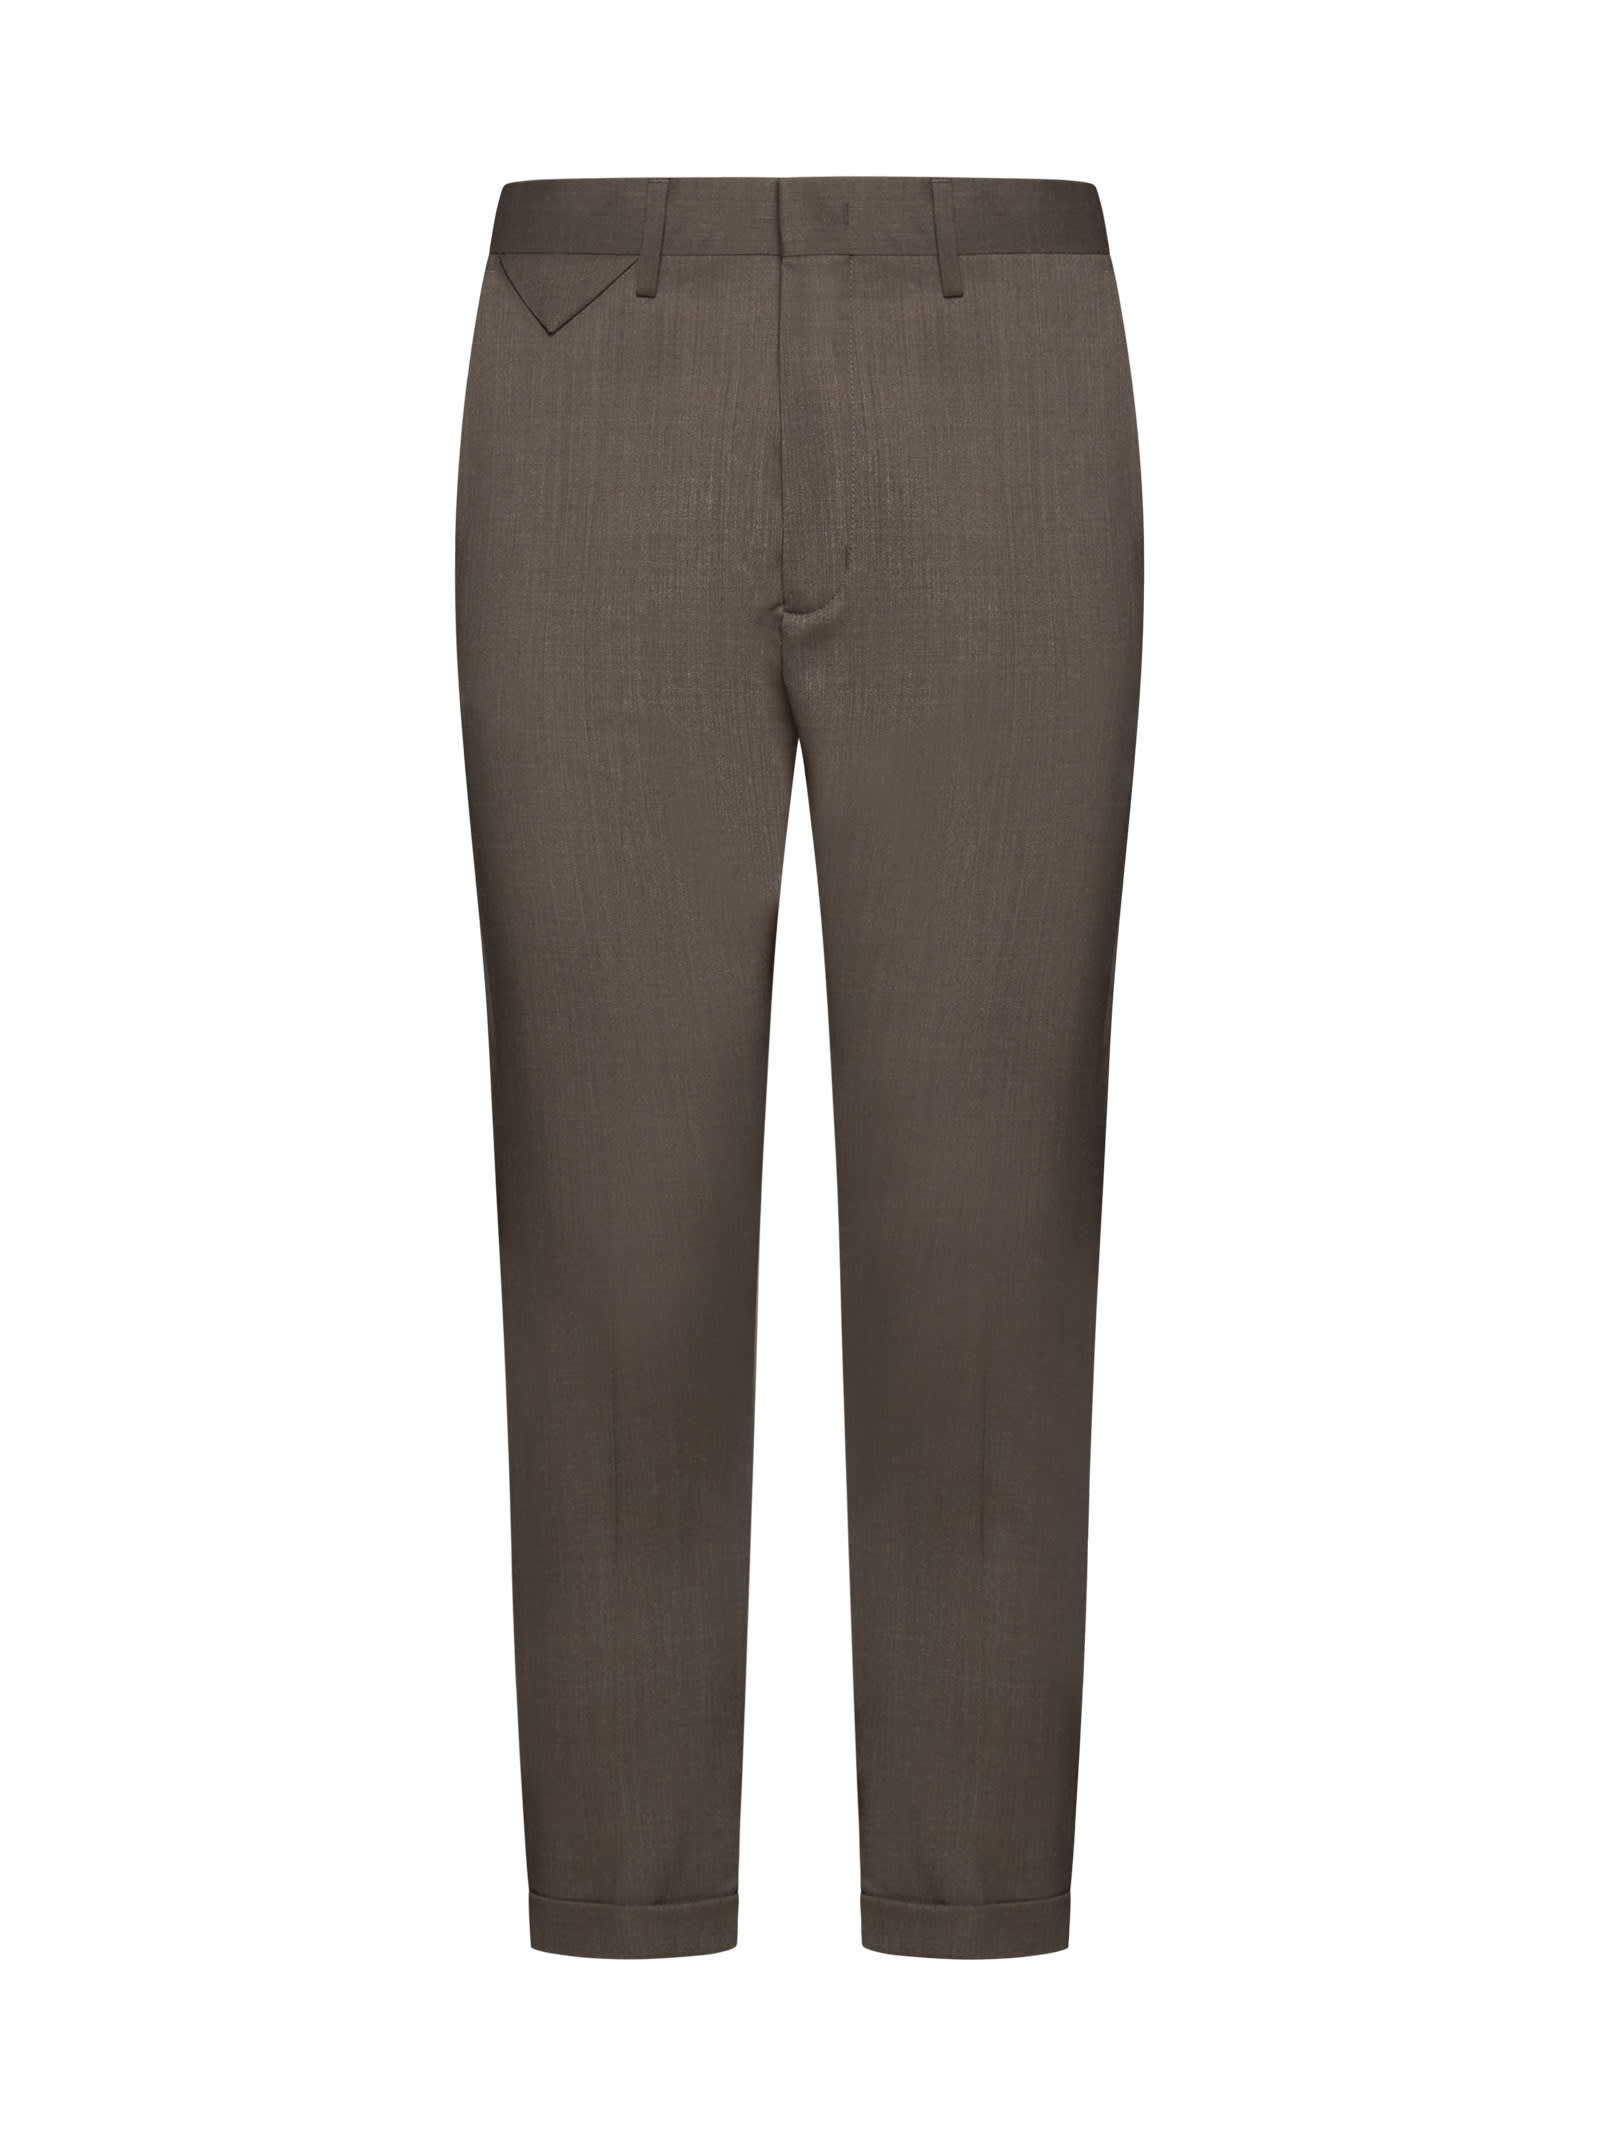 Low Brand Pants In Taupe